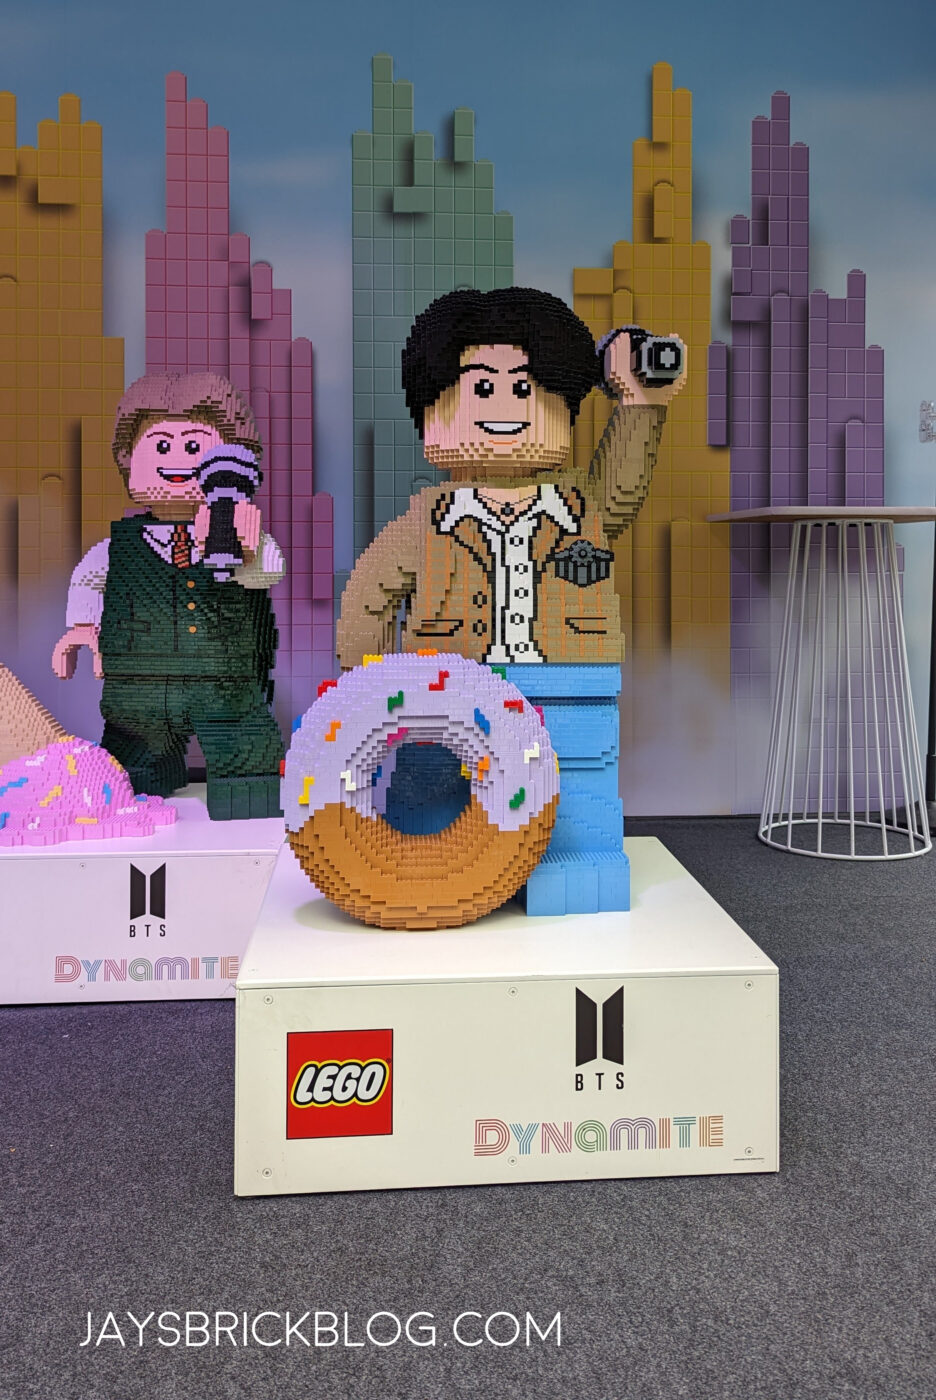 Here’s a look at the LEGO BTS Dynamite Pop-up at Orchard Road, Singapore31